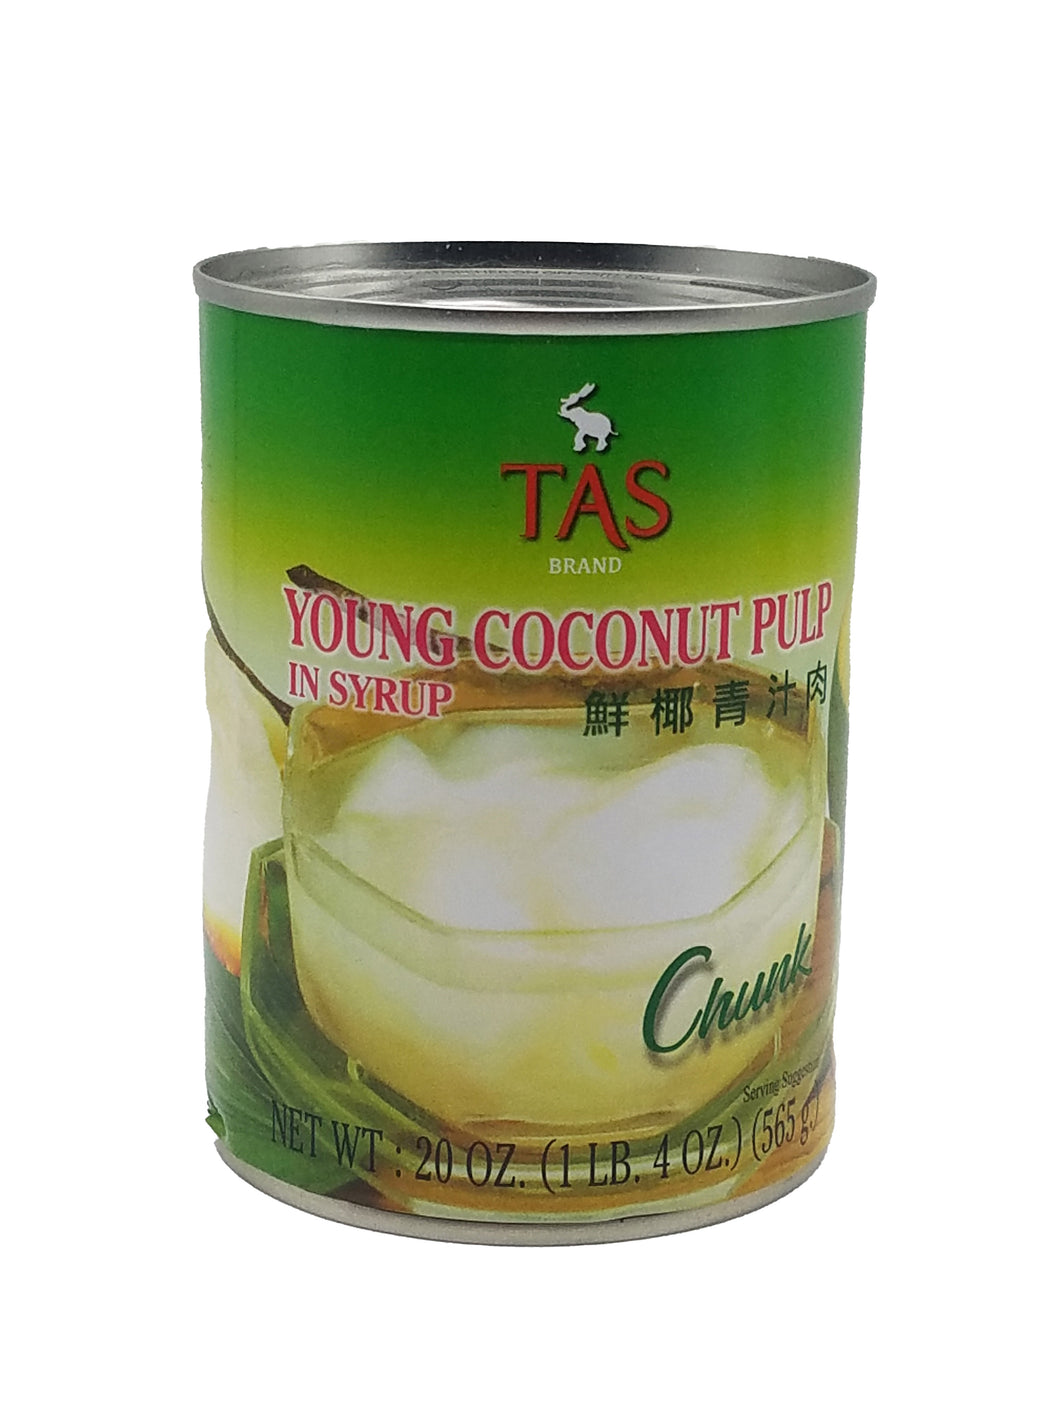 TAS Chunky Young Coconut Pulp in Syrup